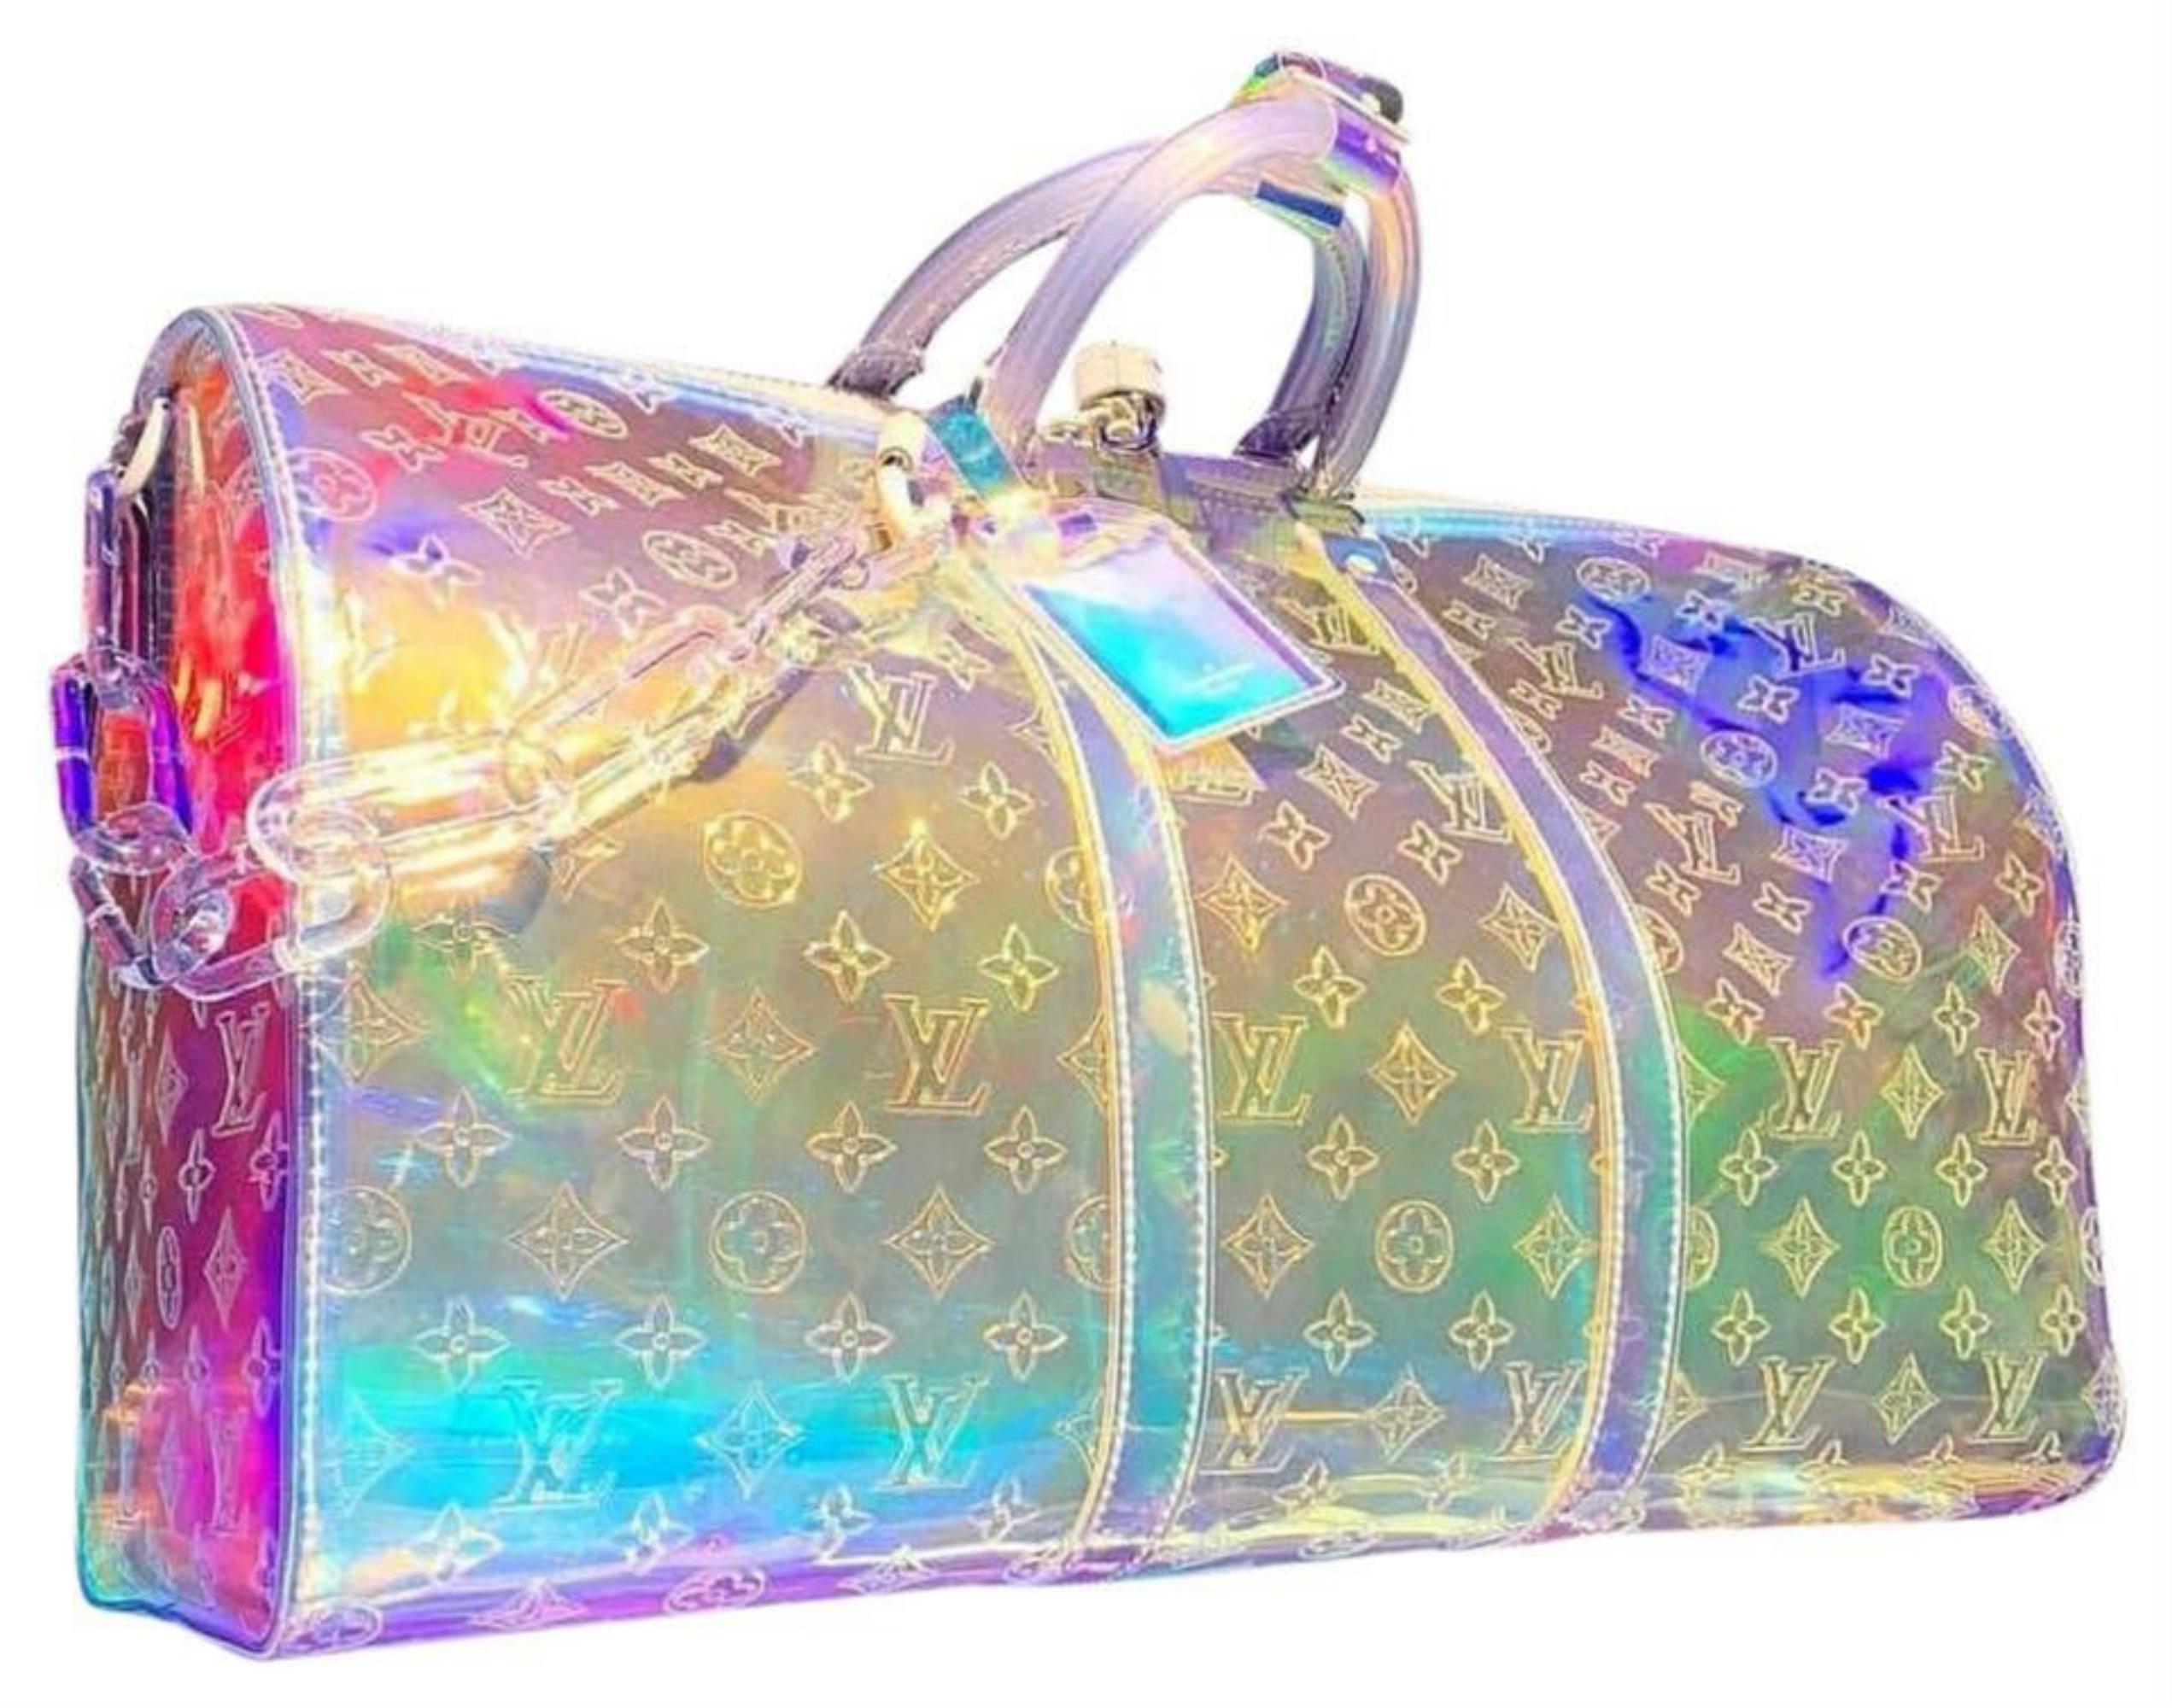 Louis Vuitton Keepall Ss19  Hologram Prism 50 Bandouliere 870370 Travel Bag In New Condition For Sale In Forest Hills, NY